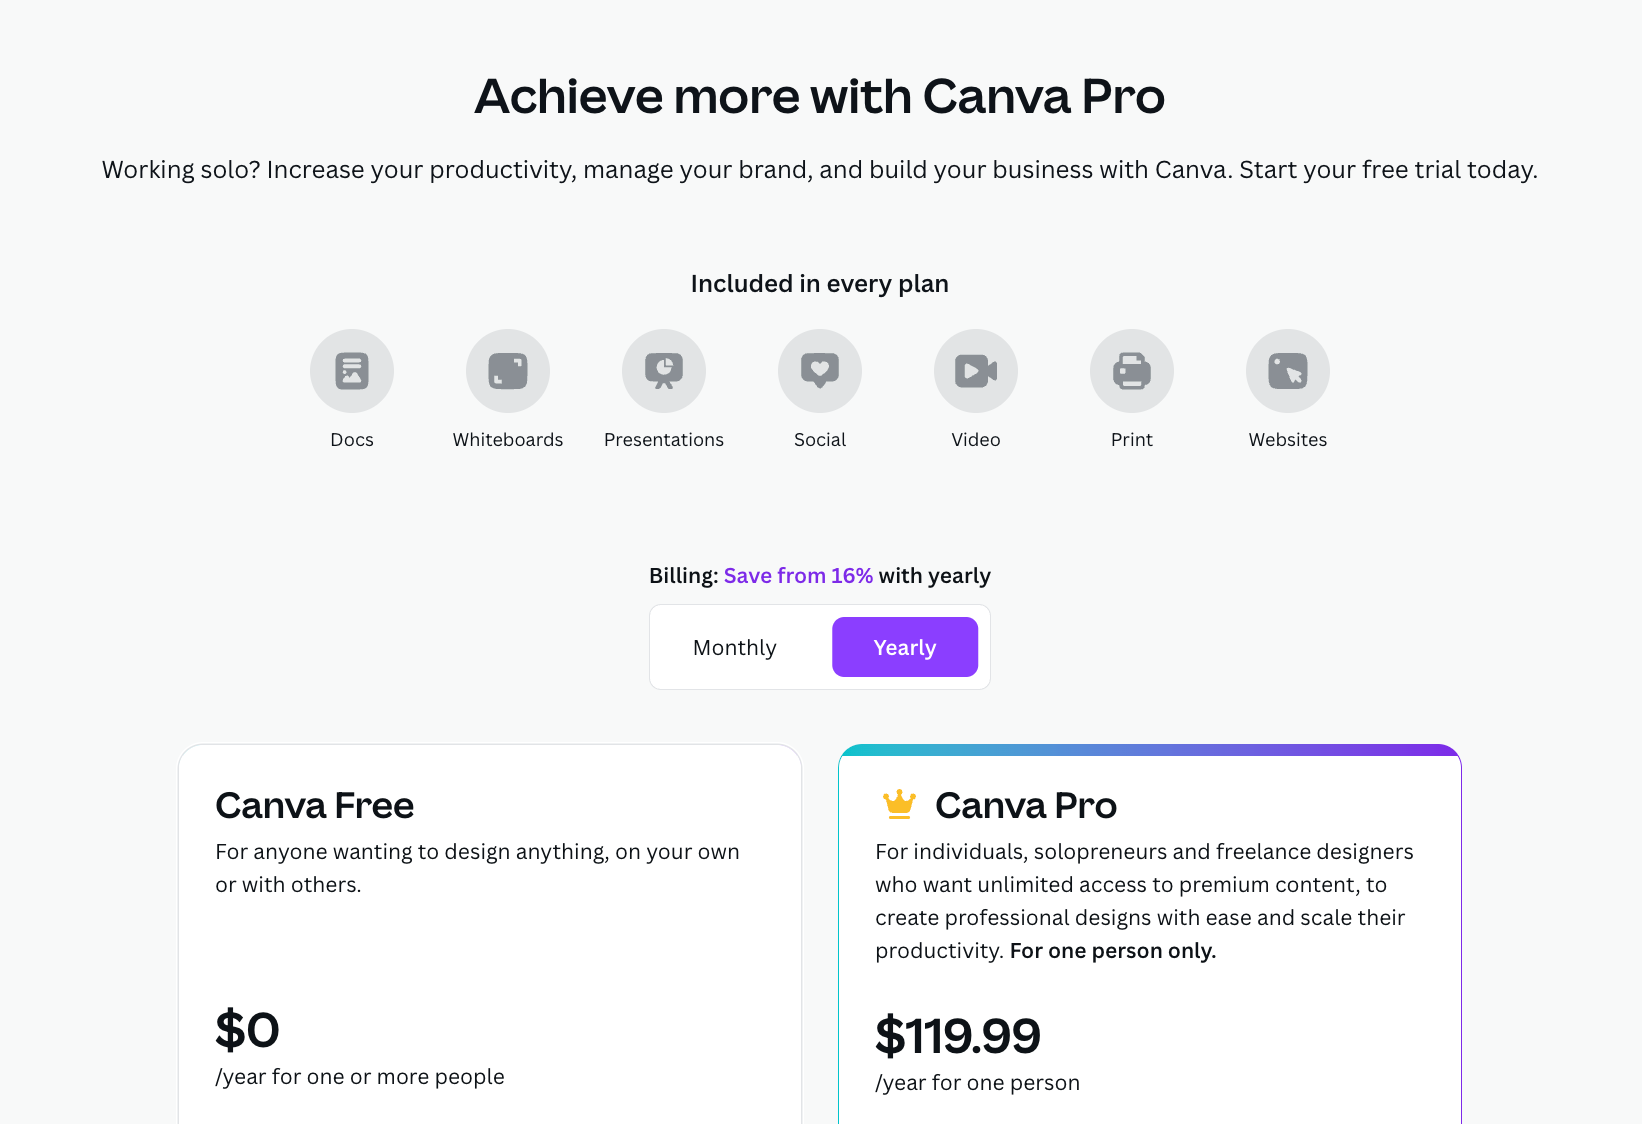 Pricing of Canva Pro.